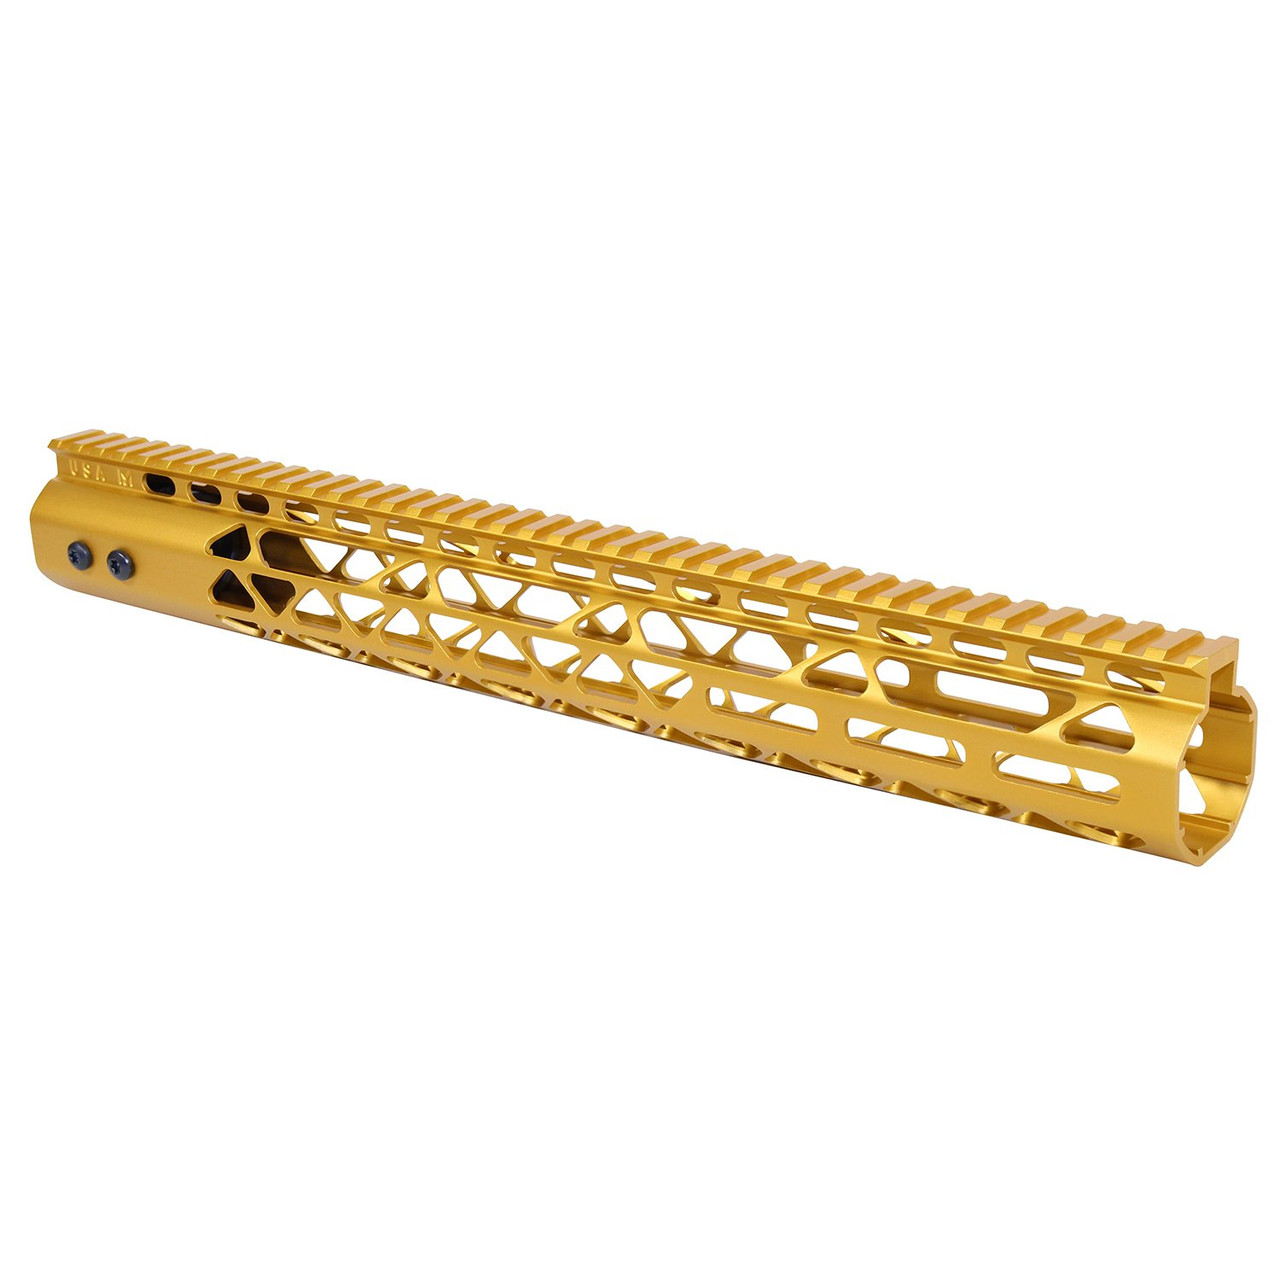 Guntec USA GT-15MLK-AL-308-GOLD 15" Air Lite Series M-LOK System Free Floating Handguard With Monolithic Top Rail (.308 Cal) (Anodized Gold)